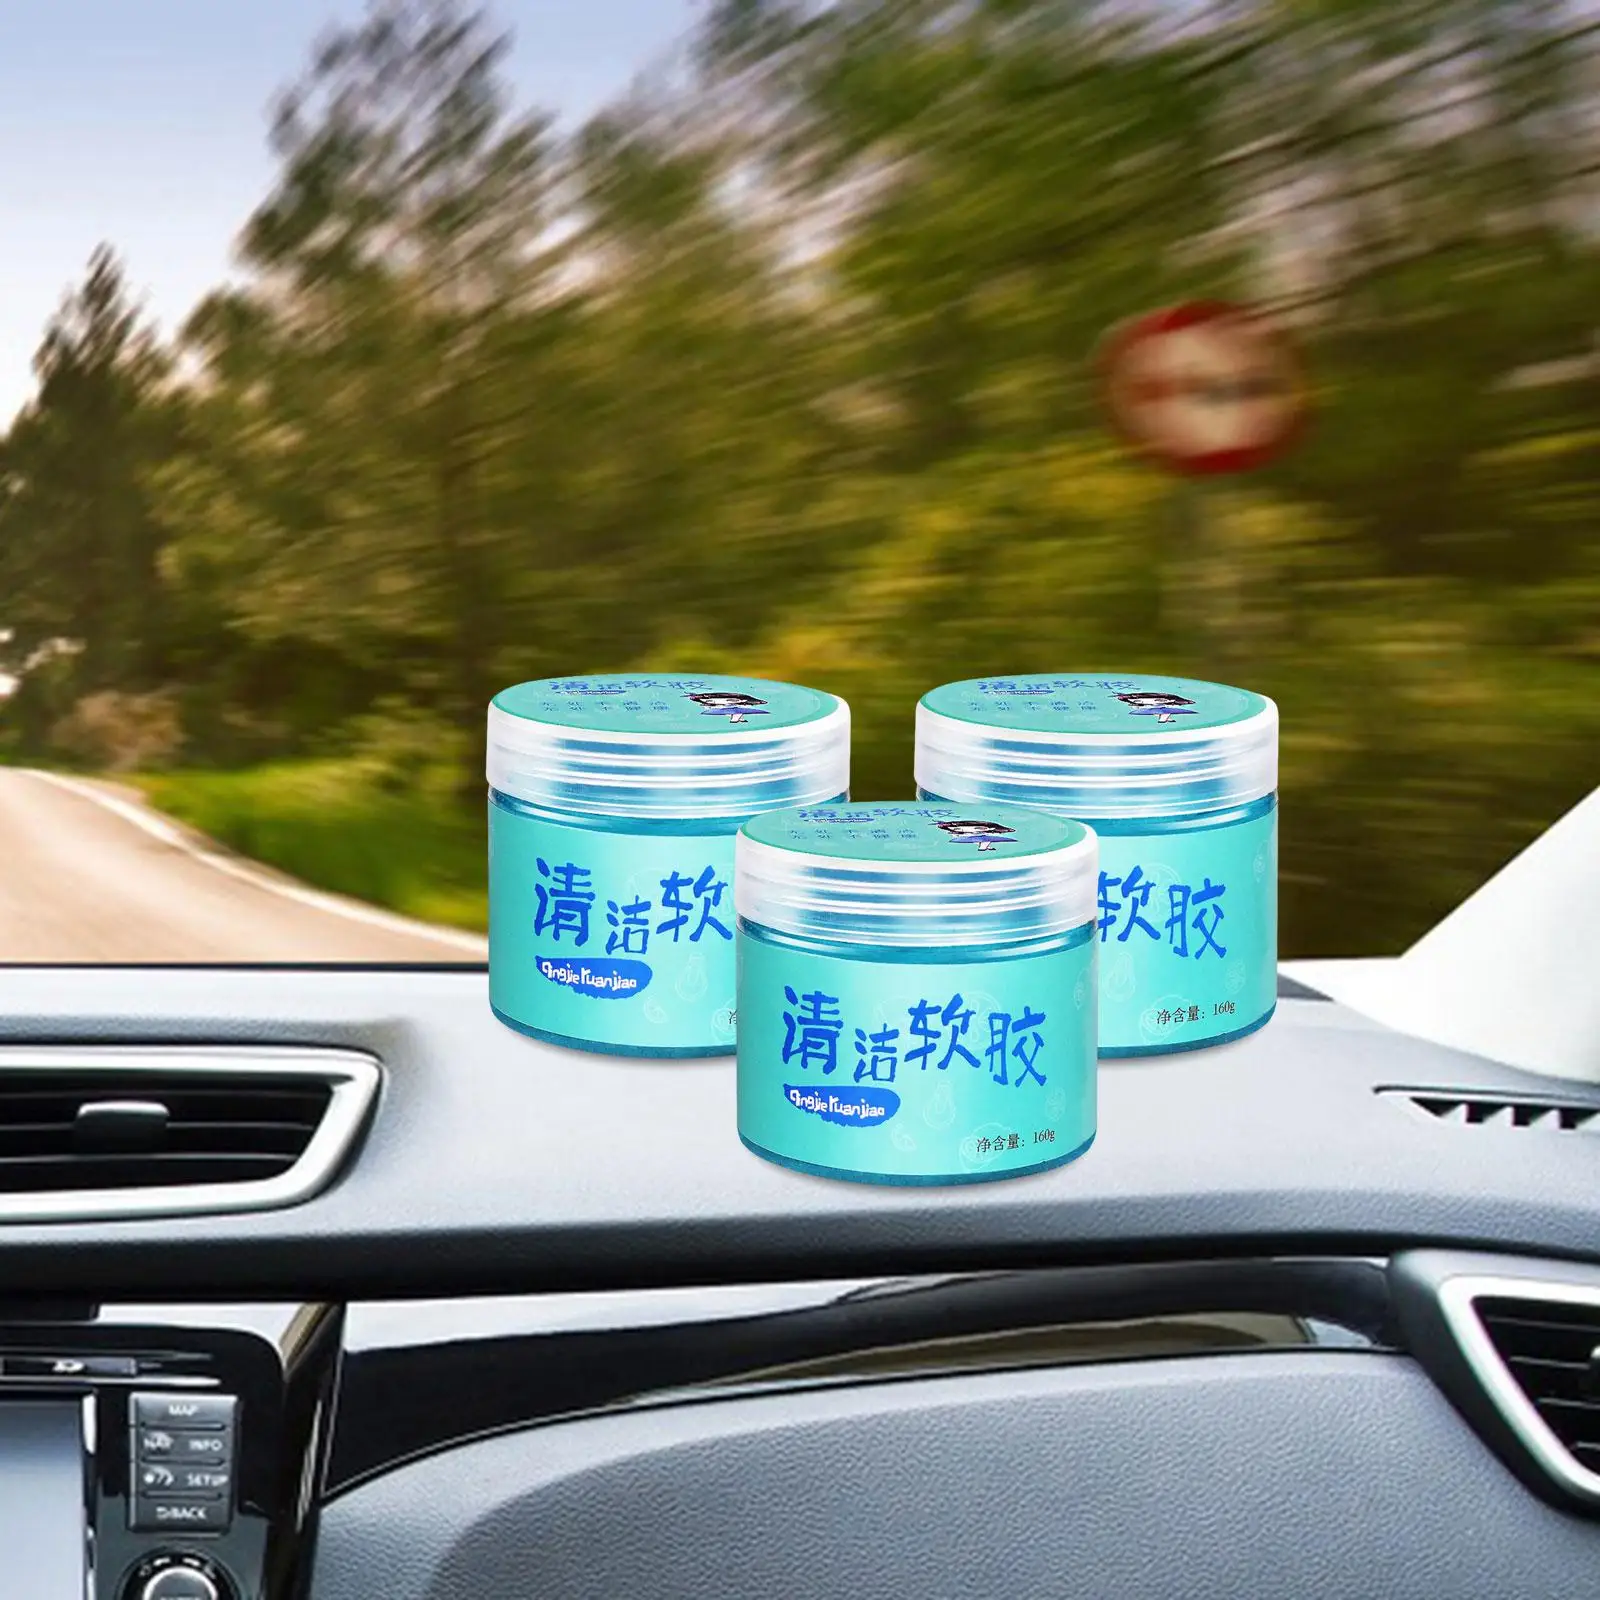 Dust Cleaning Gel Car Cleaner Putty Interior Car Dashboard Cleaner Computer Dust Remover for Air Vents Home Office Camera PC